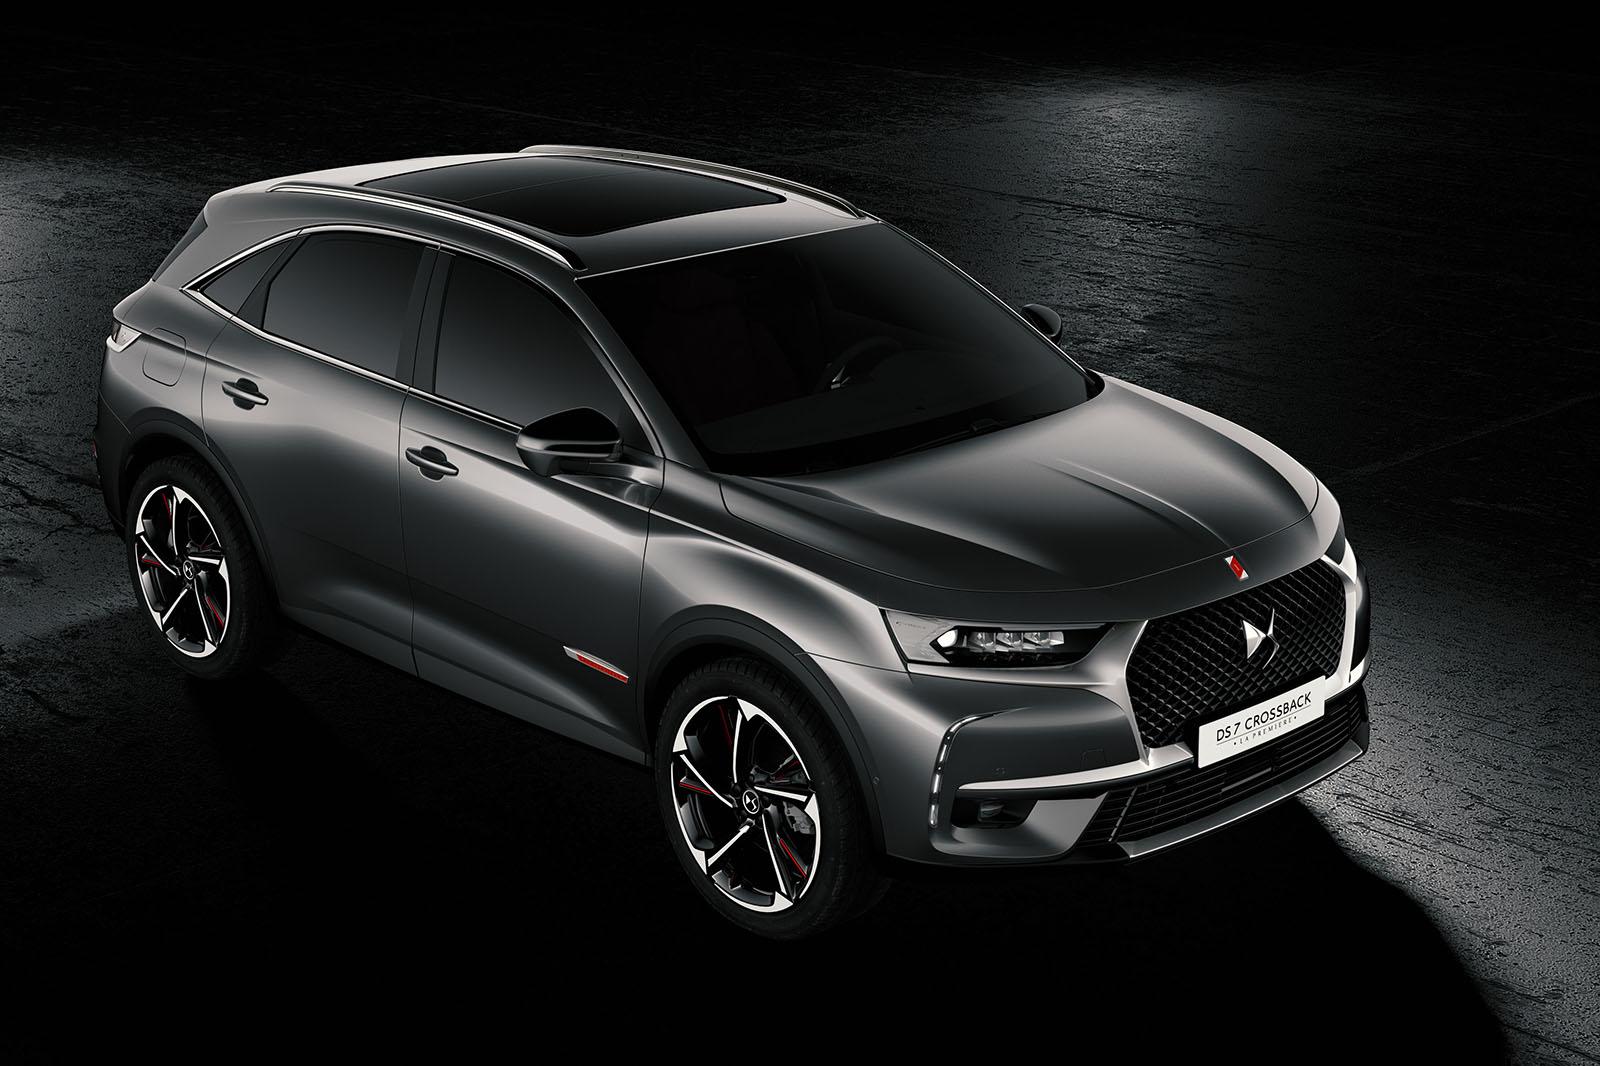 DS Crossback priced from £,